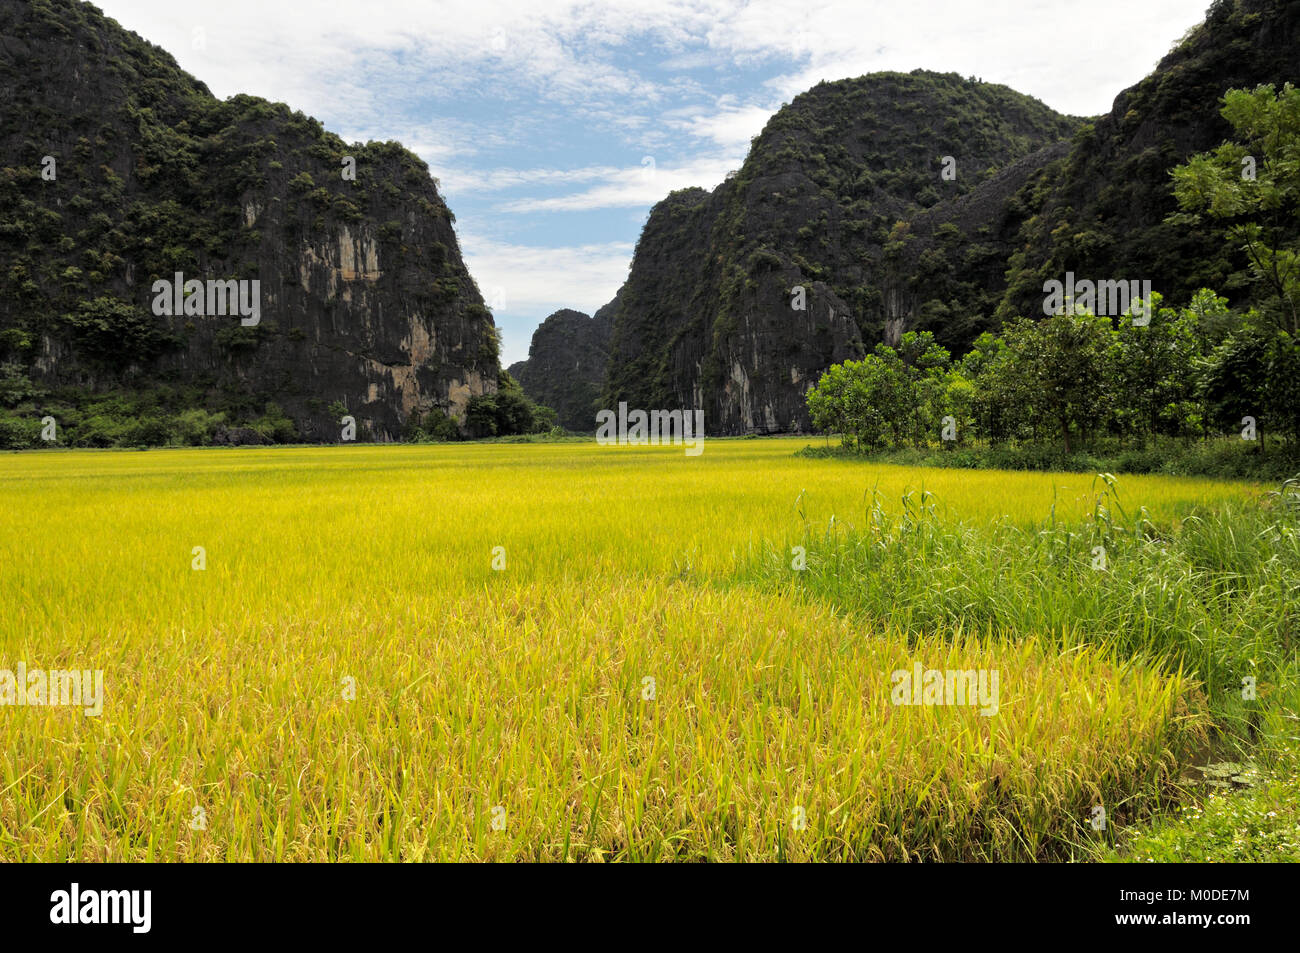 Rice field and mountains in Tam Coc, Ninh Binh Province, north Vietnam Stock Photo